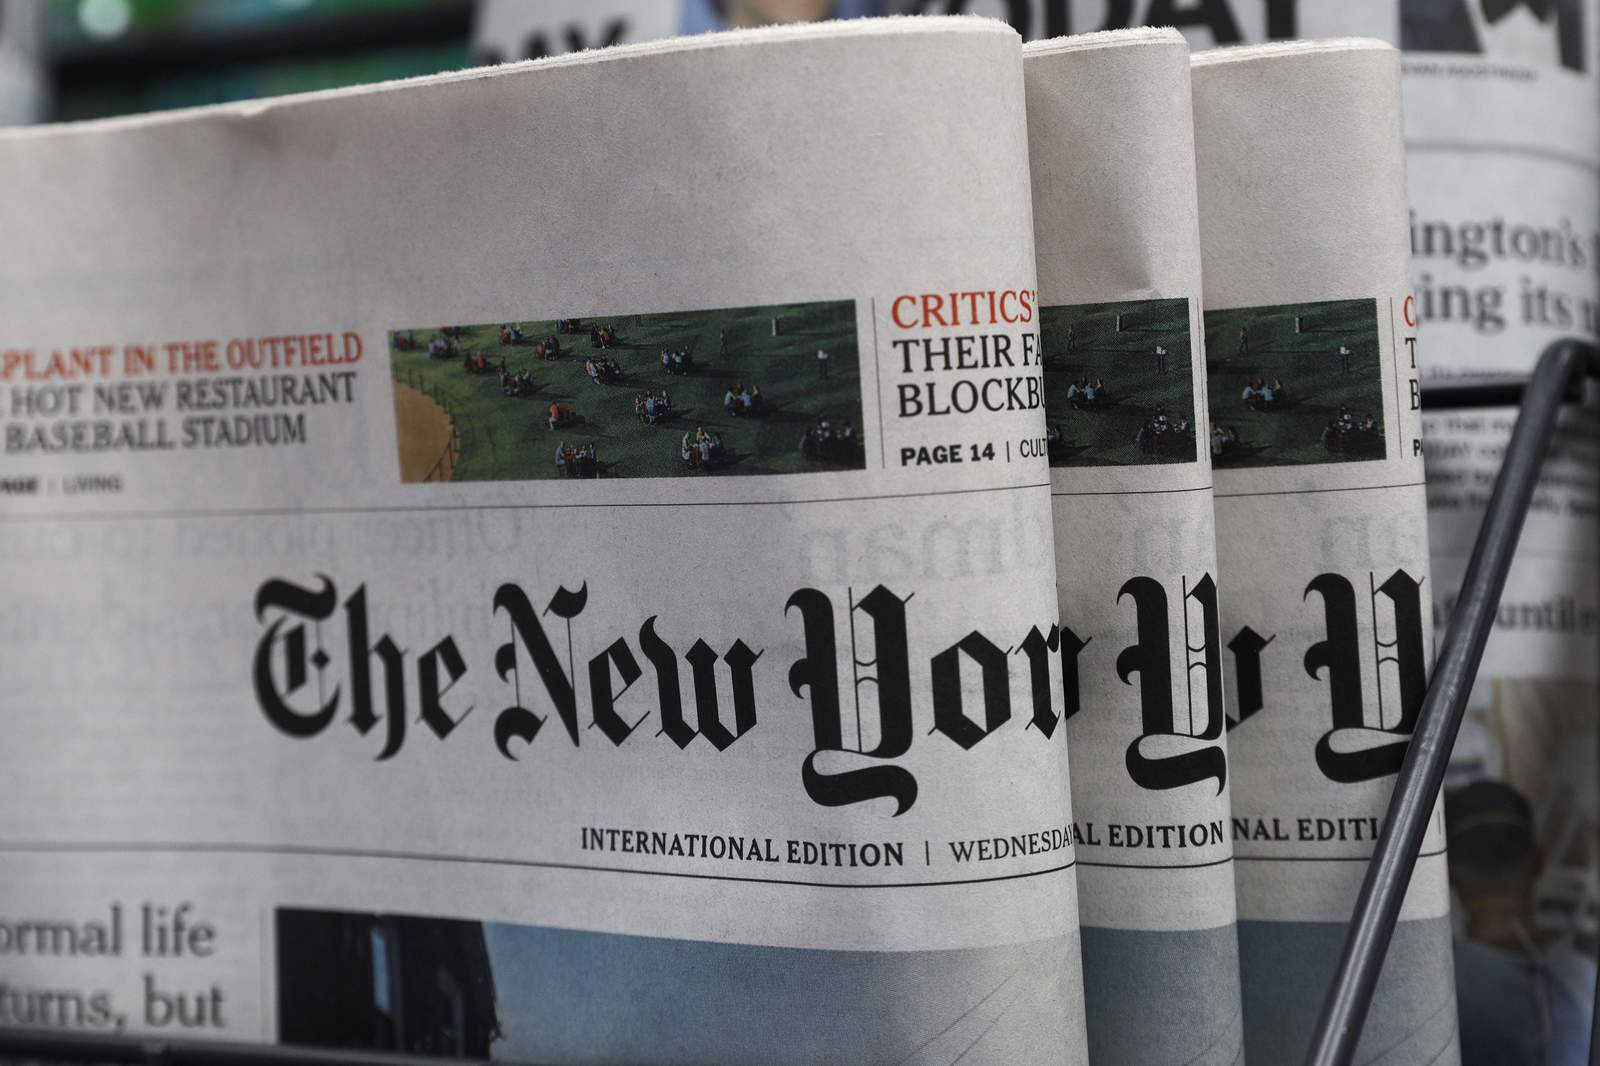 NY Times to move some staff from Hong Kong, citing new law